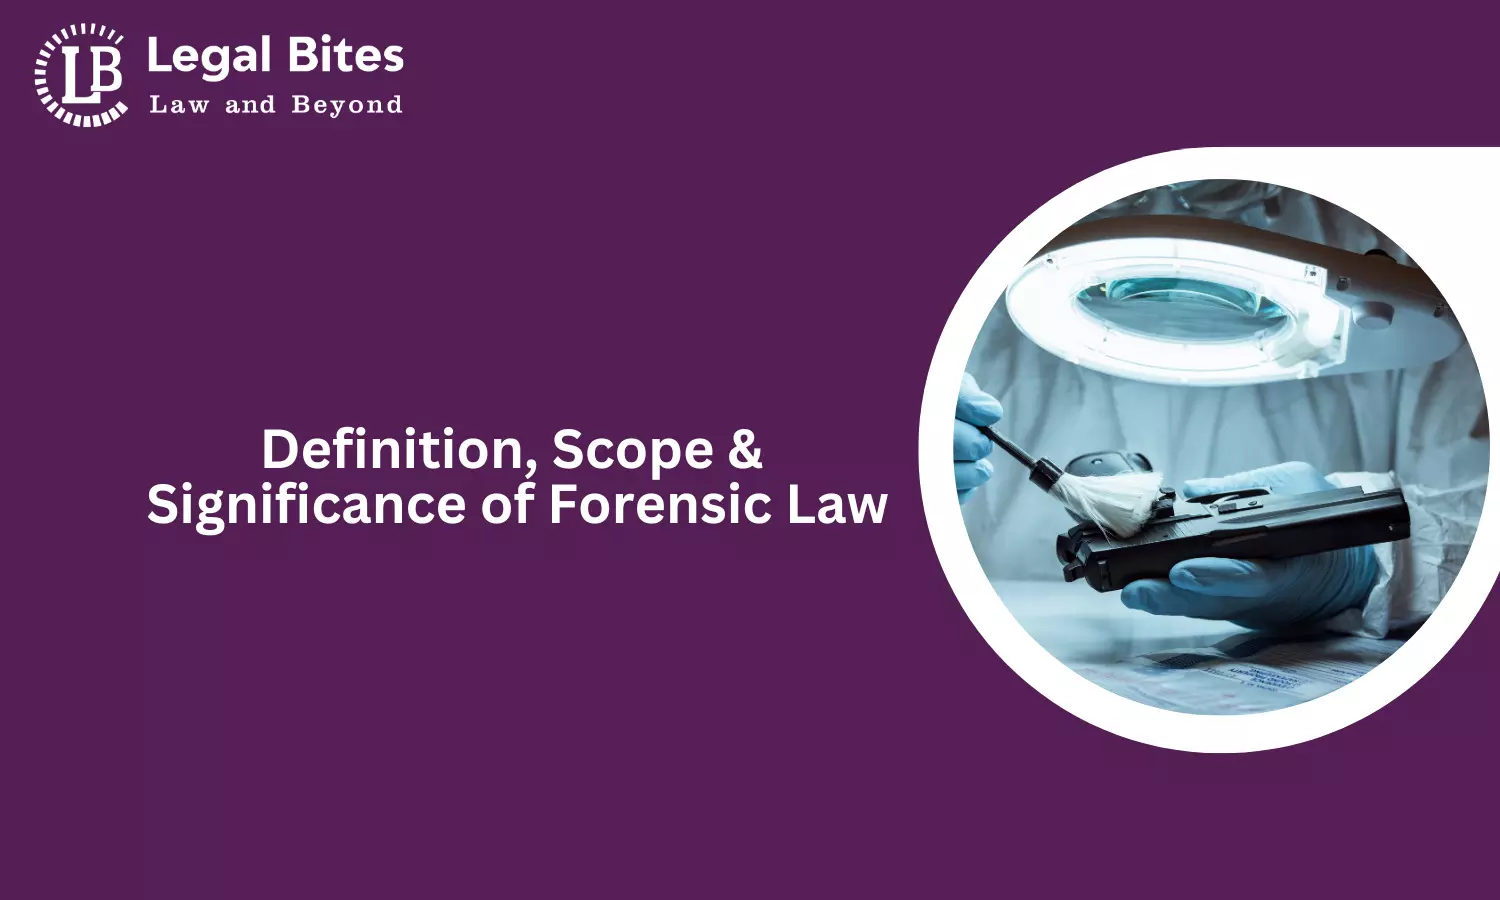 Definition, Scope, and Significance of Forensic Law